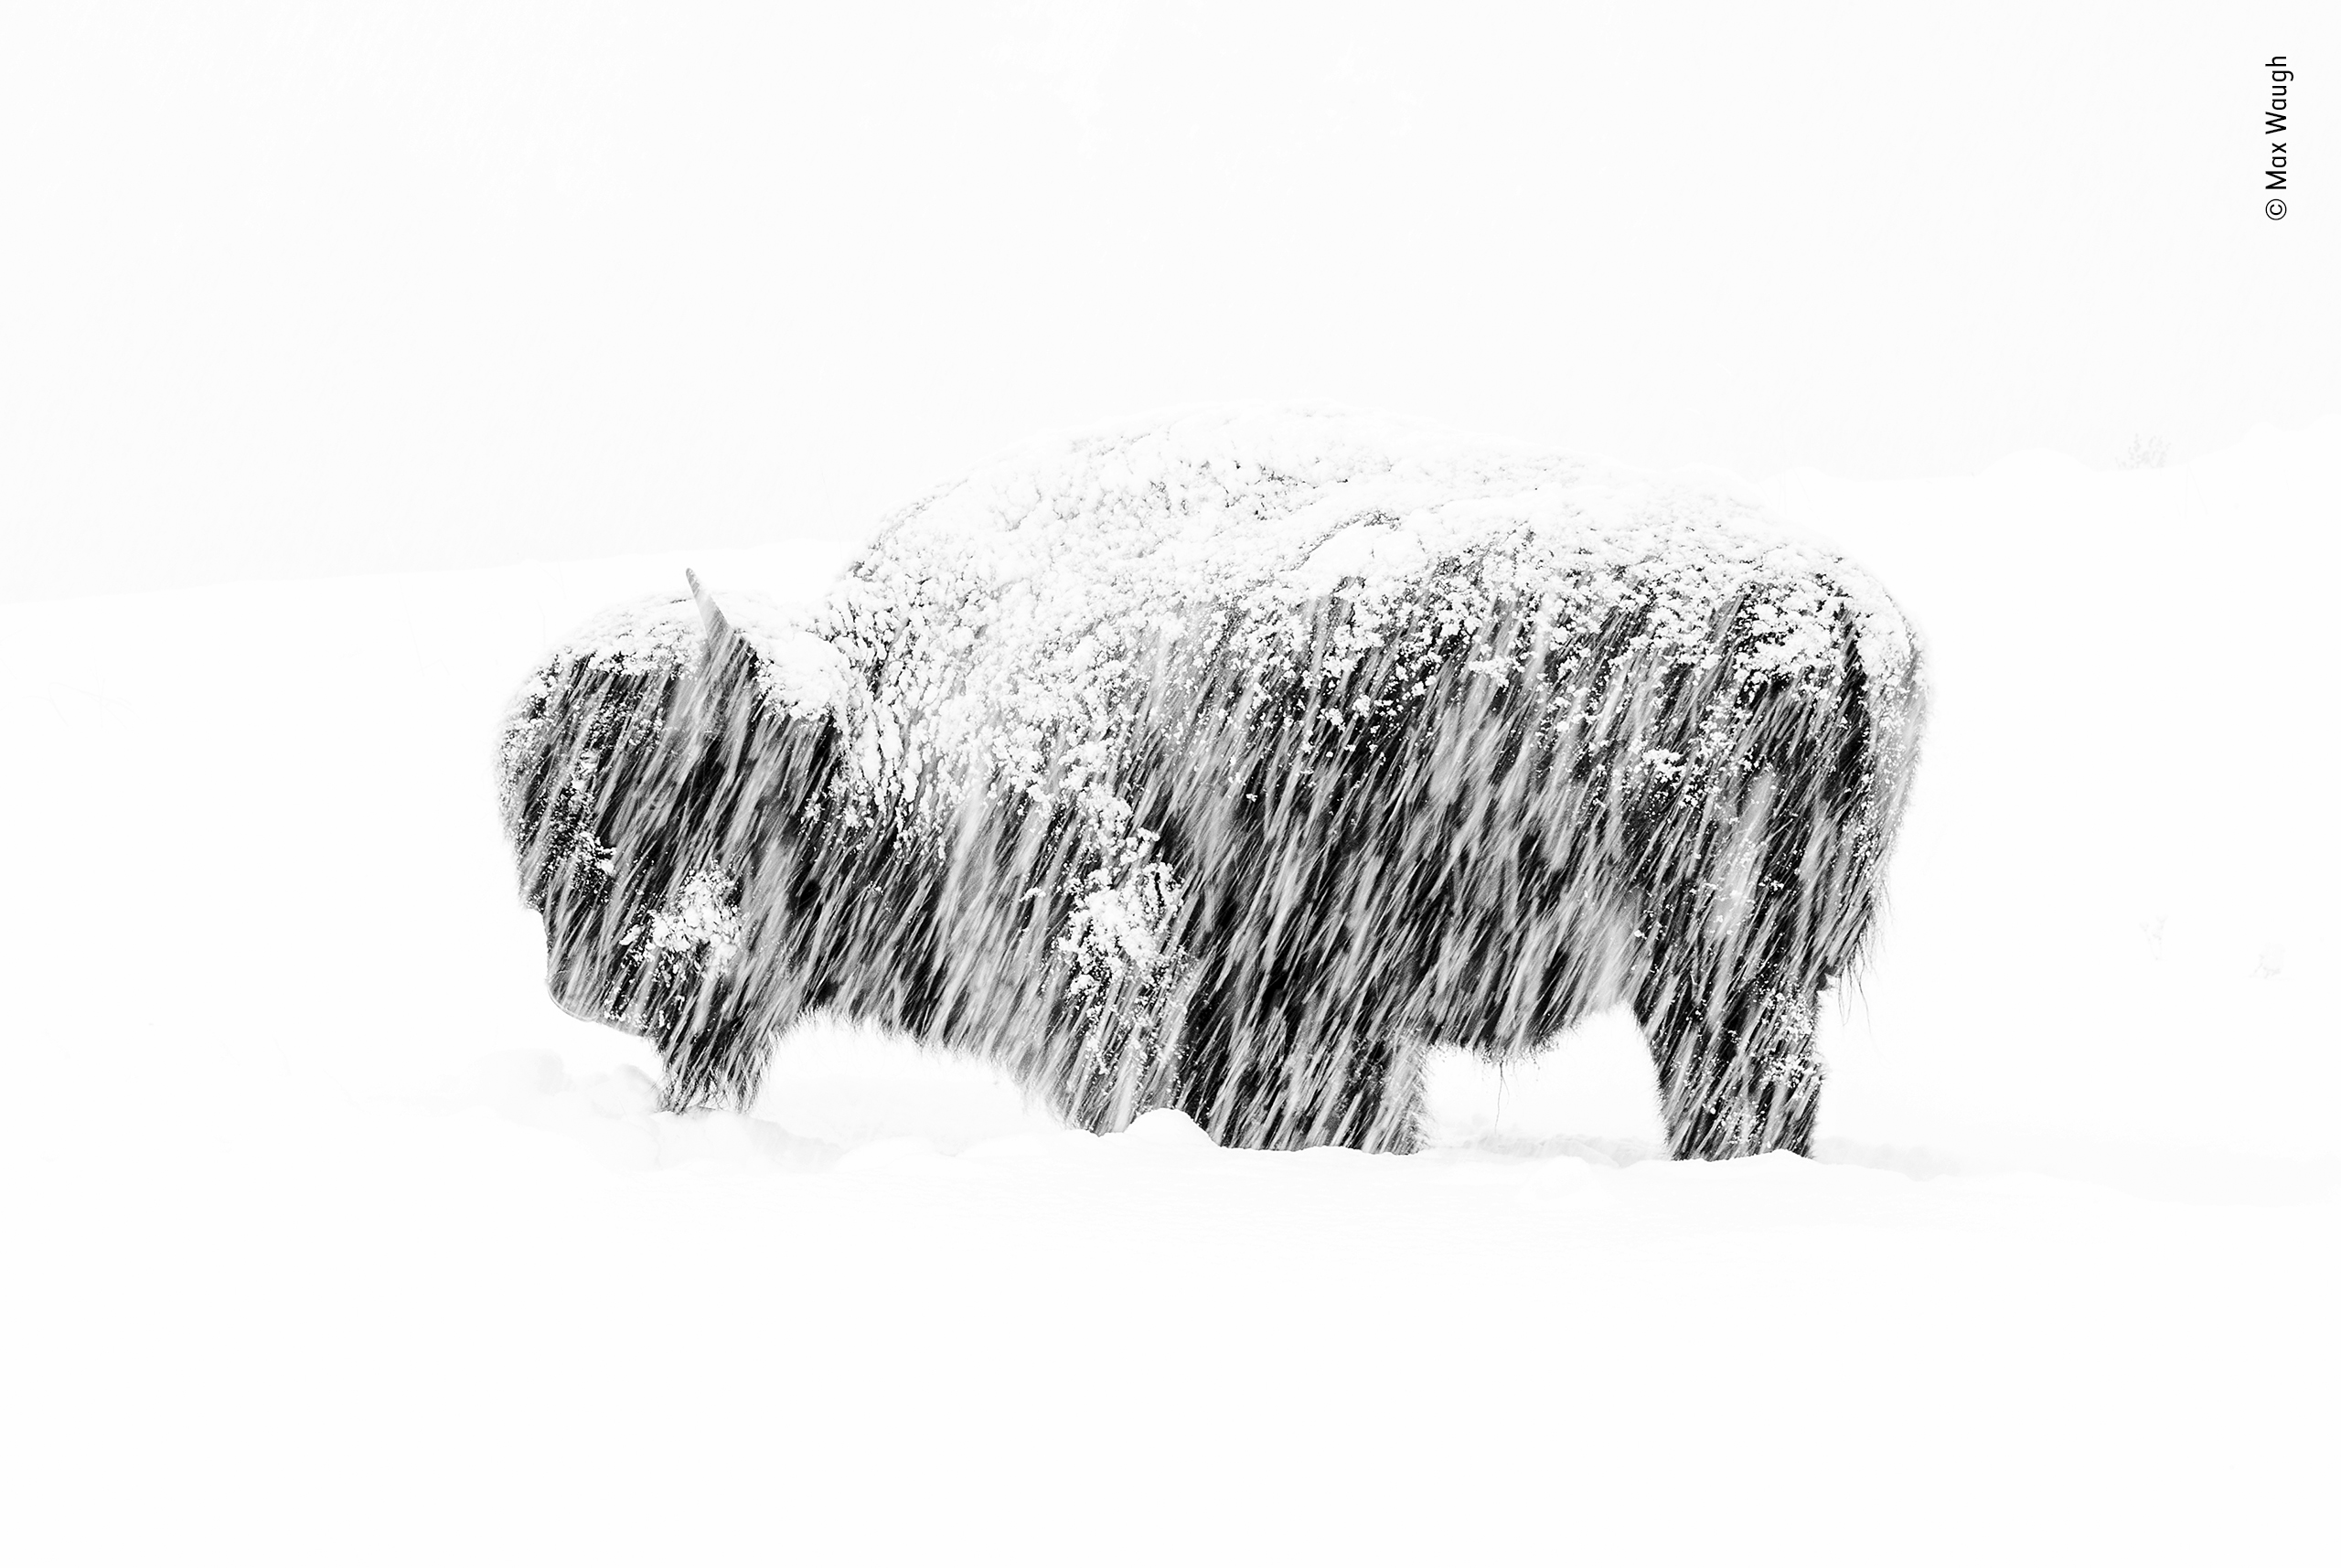 Snow exposure by Max Waugh, USA Winner 2019, Black and White